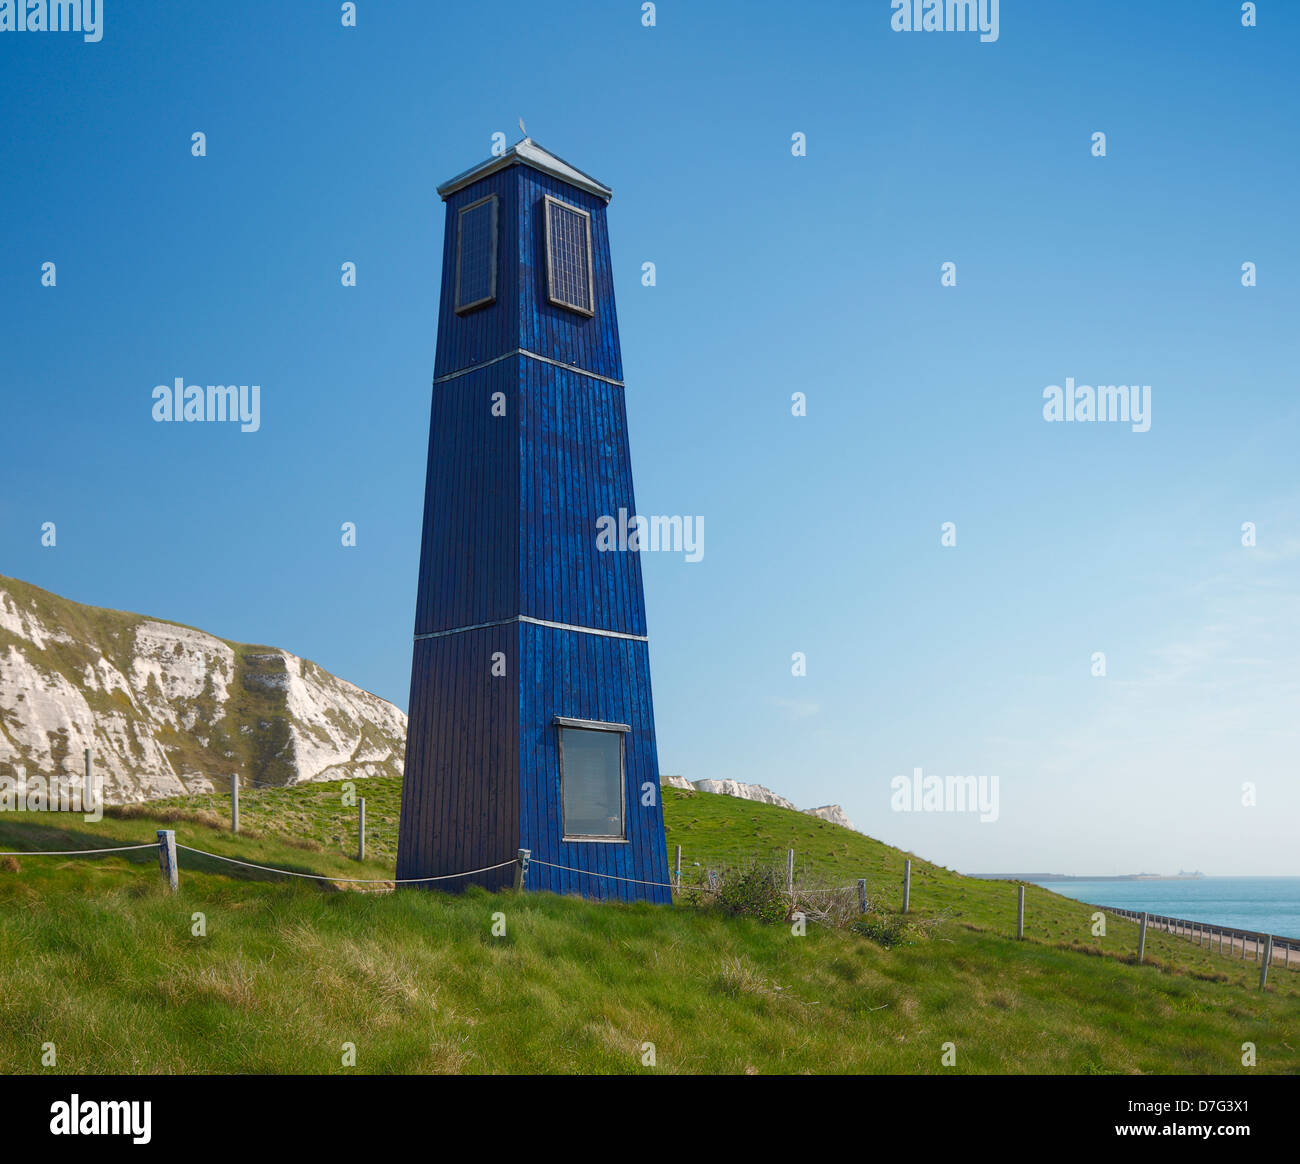 Samphire Hoe look out tower. Stock Photo